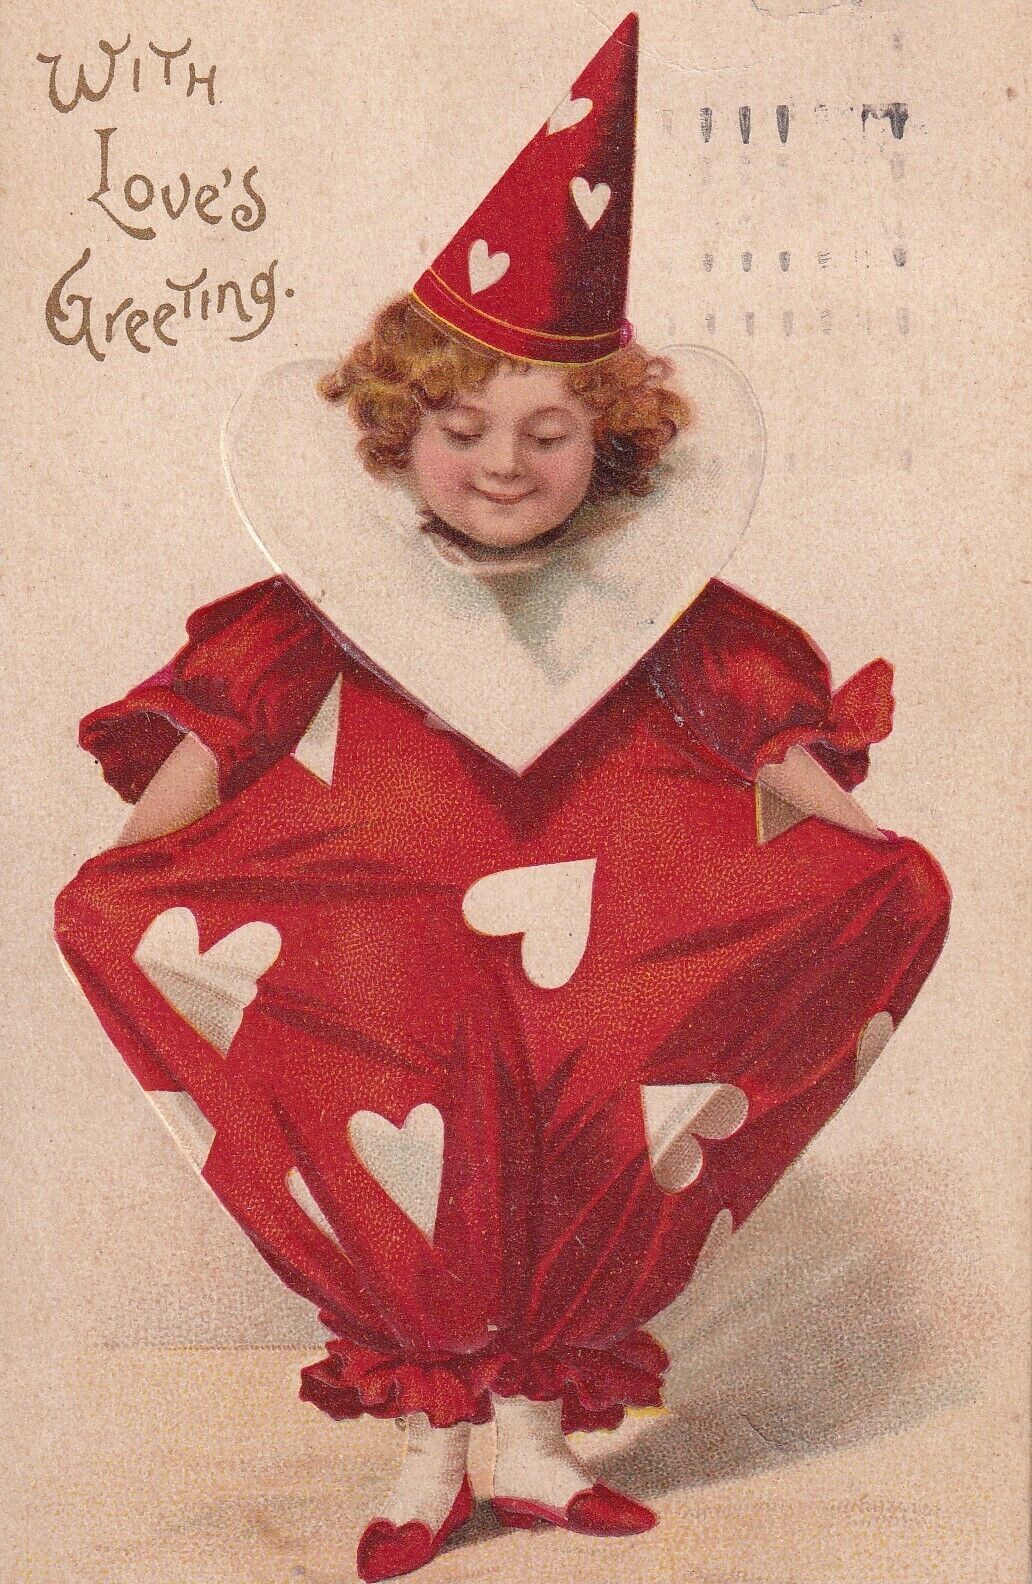 Vintage With Loves Greeting Valentine Postcard Early 1930s Young Girl Clown Suit